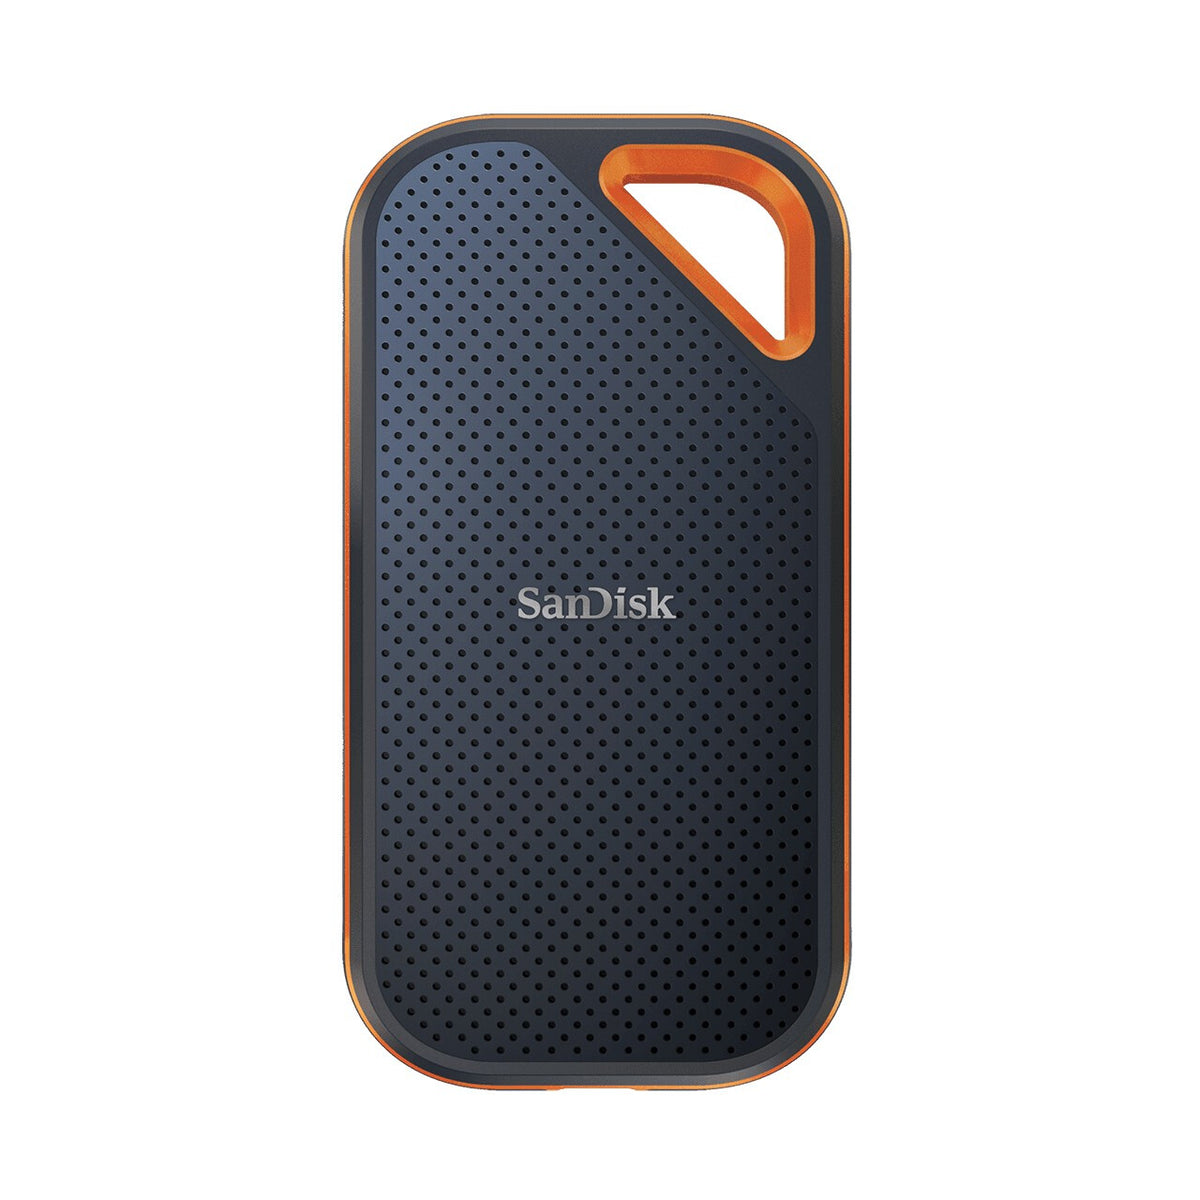 SanDisk Extreme PRO Portable - External solid state drive - 1 TB